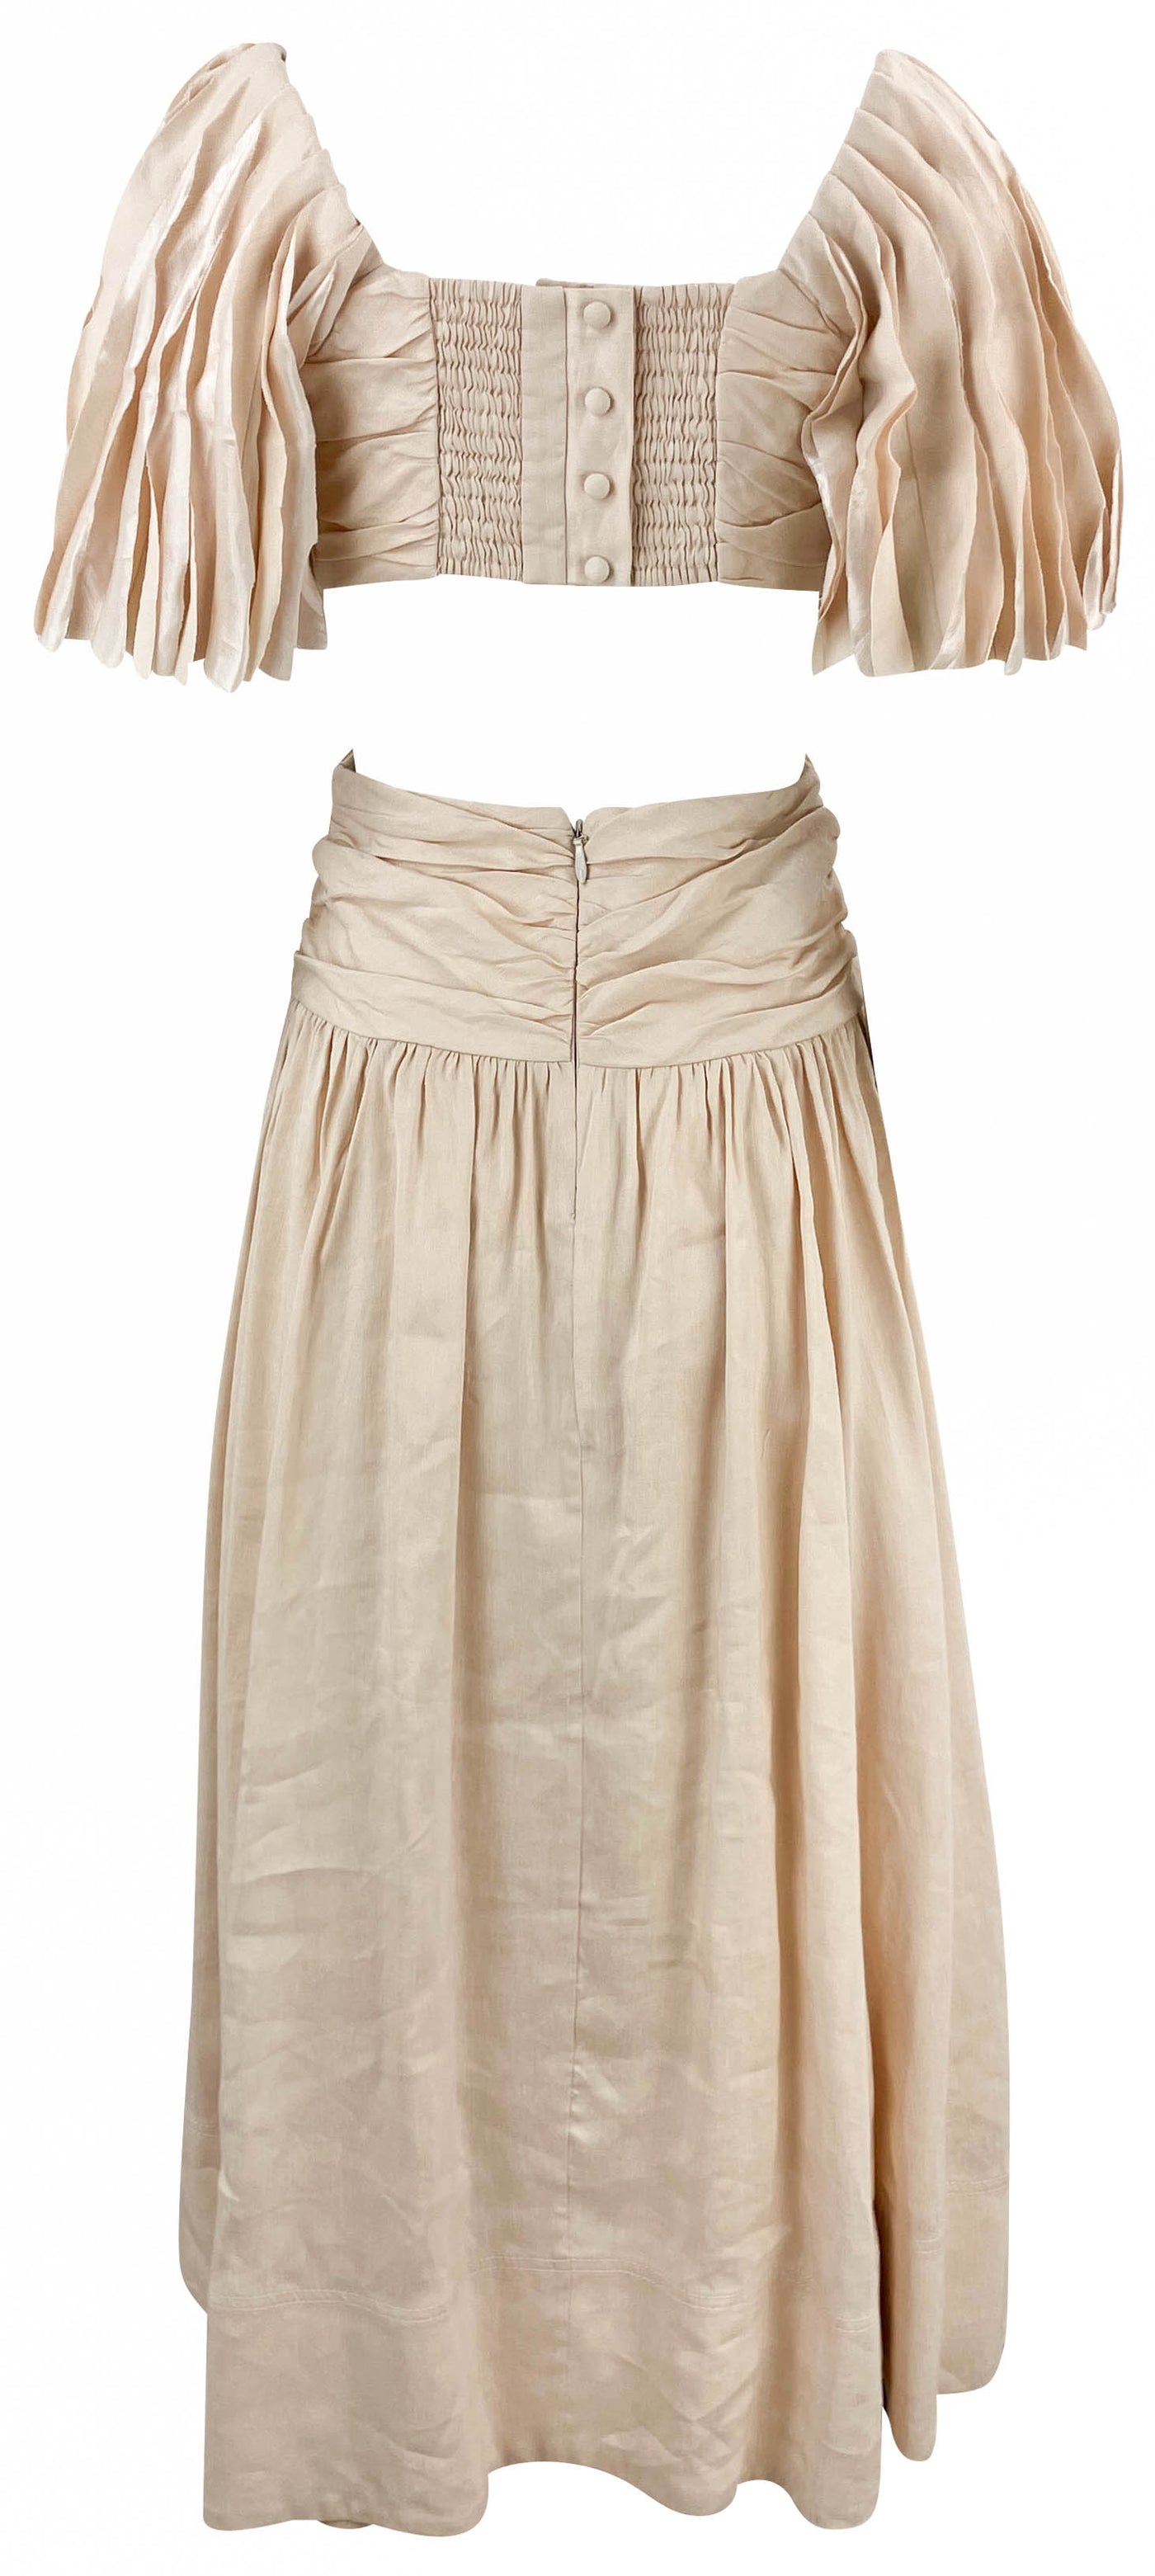 Aje. Marianne Ruched Midi Dress in Coconut Cream - Discounts on Aje. at UAL